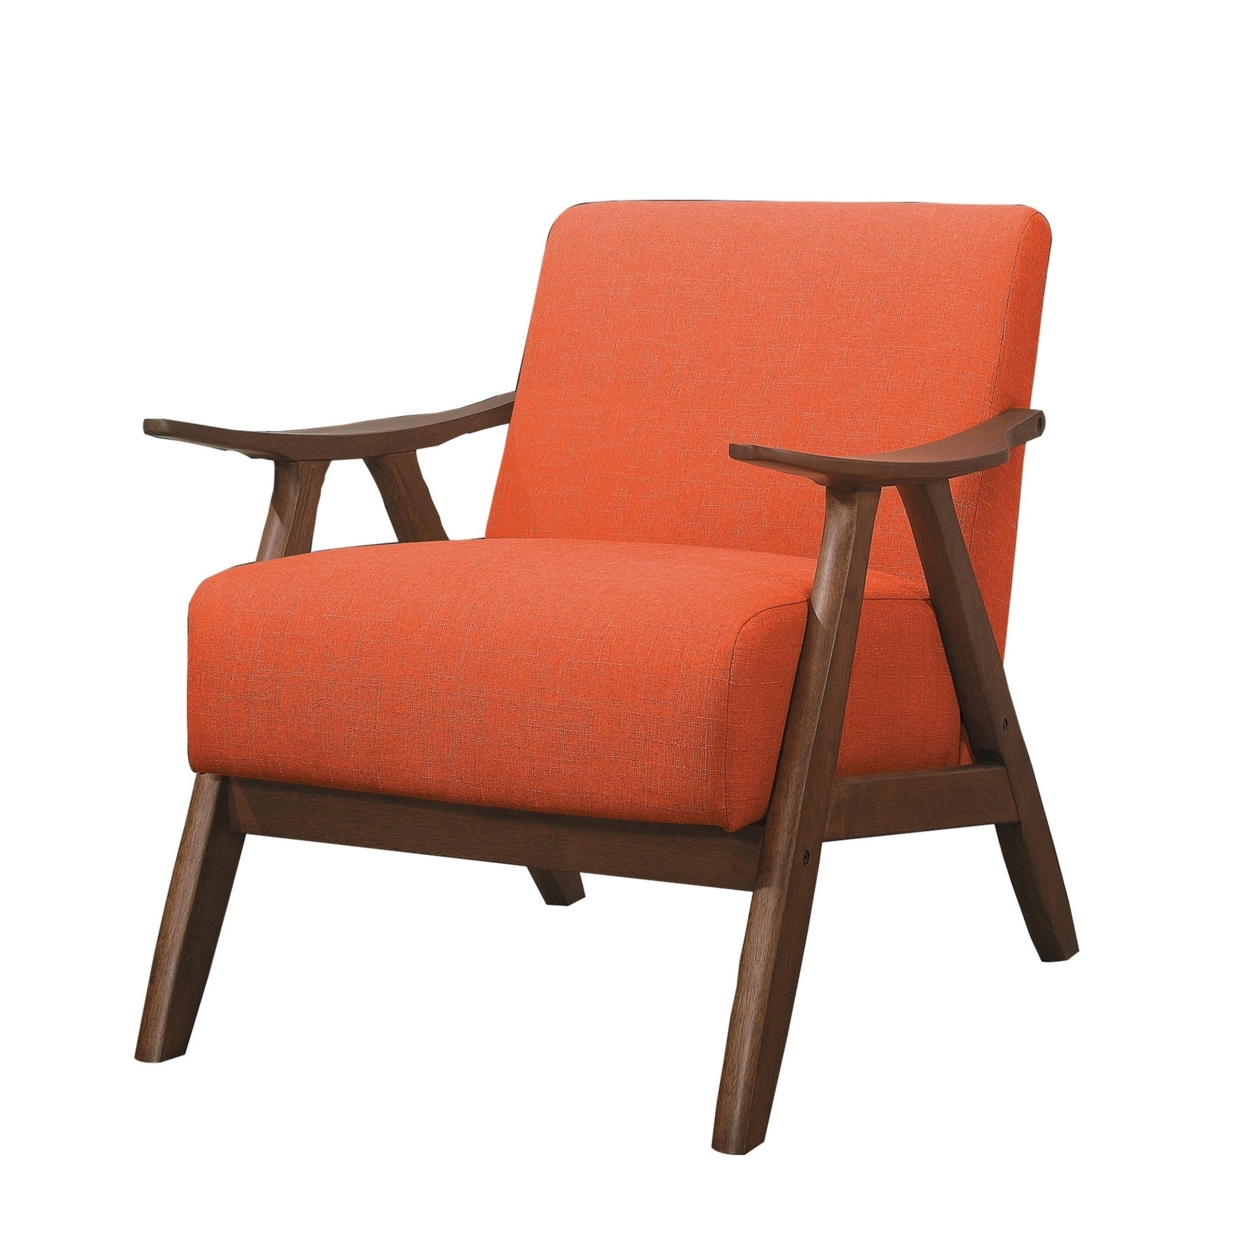 Fabric Upholstered Accent Chair With Curved Armrests, Orange- Saltoro Sherpi